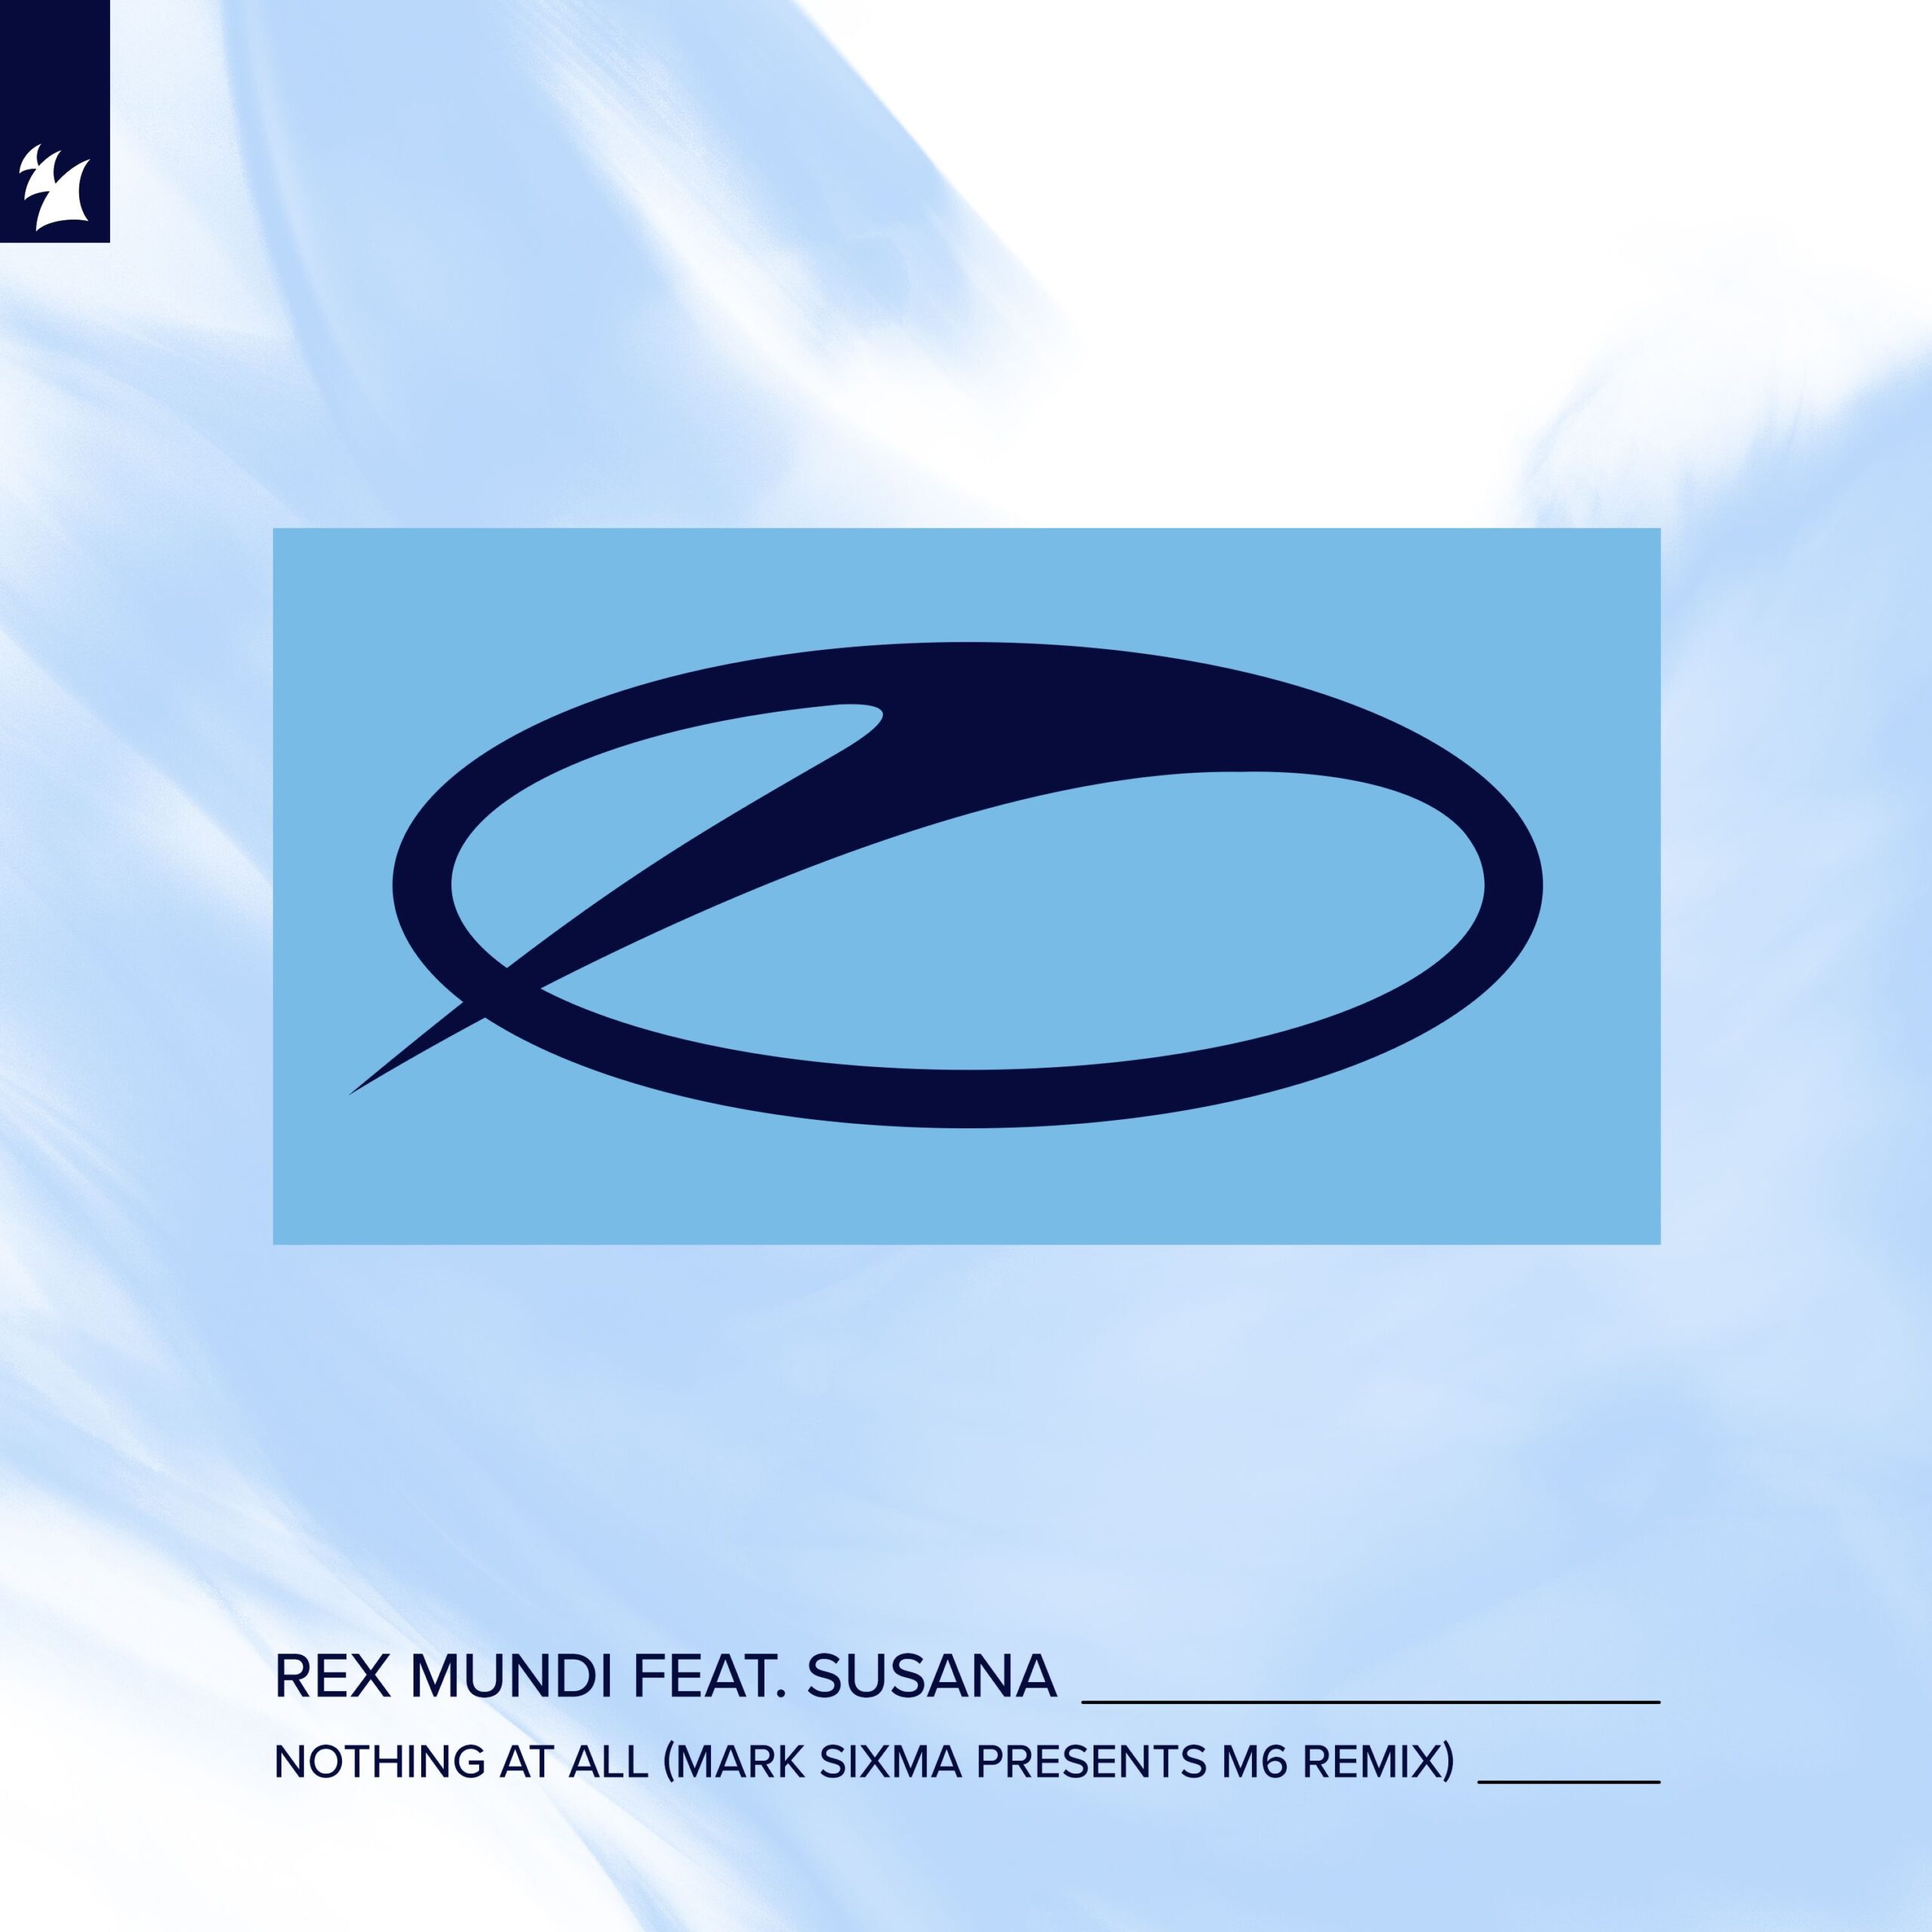 Rex Mundi feat. Susana presents Nothing At All (Mark Sixma presents M6 Remix) on A State Of Trance